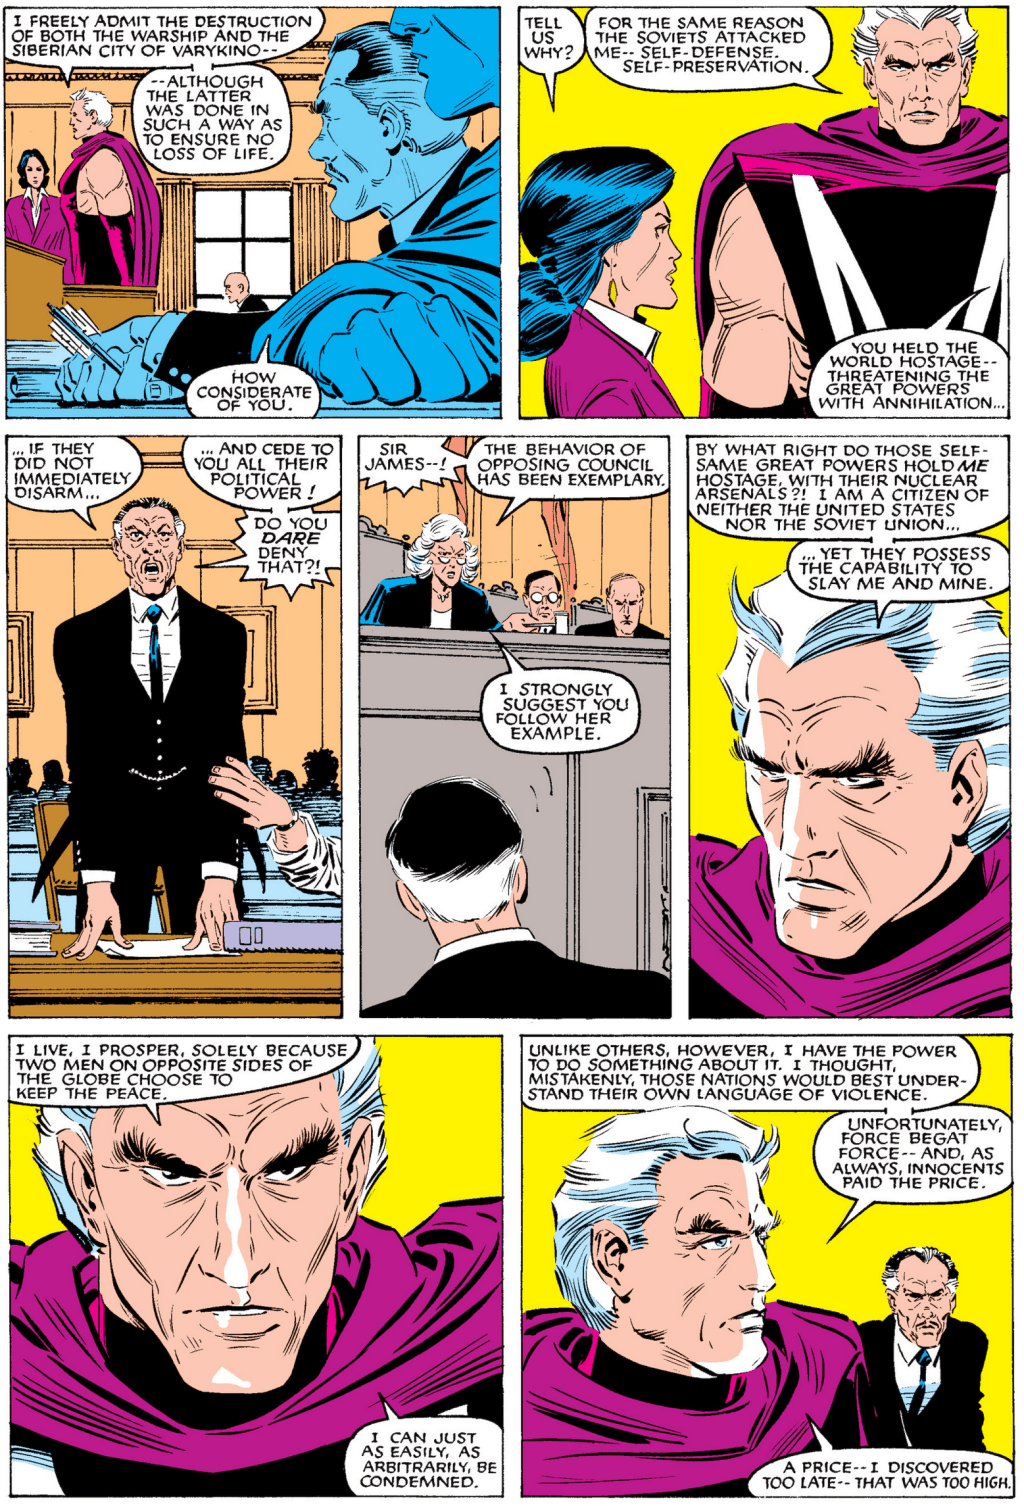 Magneto speaks in his own self-defense in Uncanny X-Men Vol. 1 #200 "The Trial of Magneto!" (1985), Marvel Comics. Words by Chris Claremont, art by John Romita Jr., Dan Green, Glynis Oliver, and Tom Orzechowski.